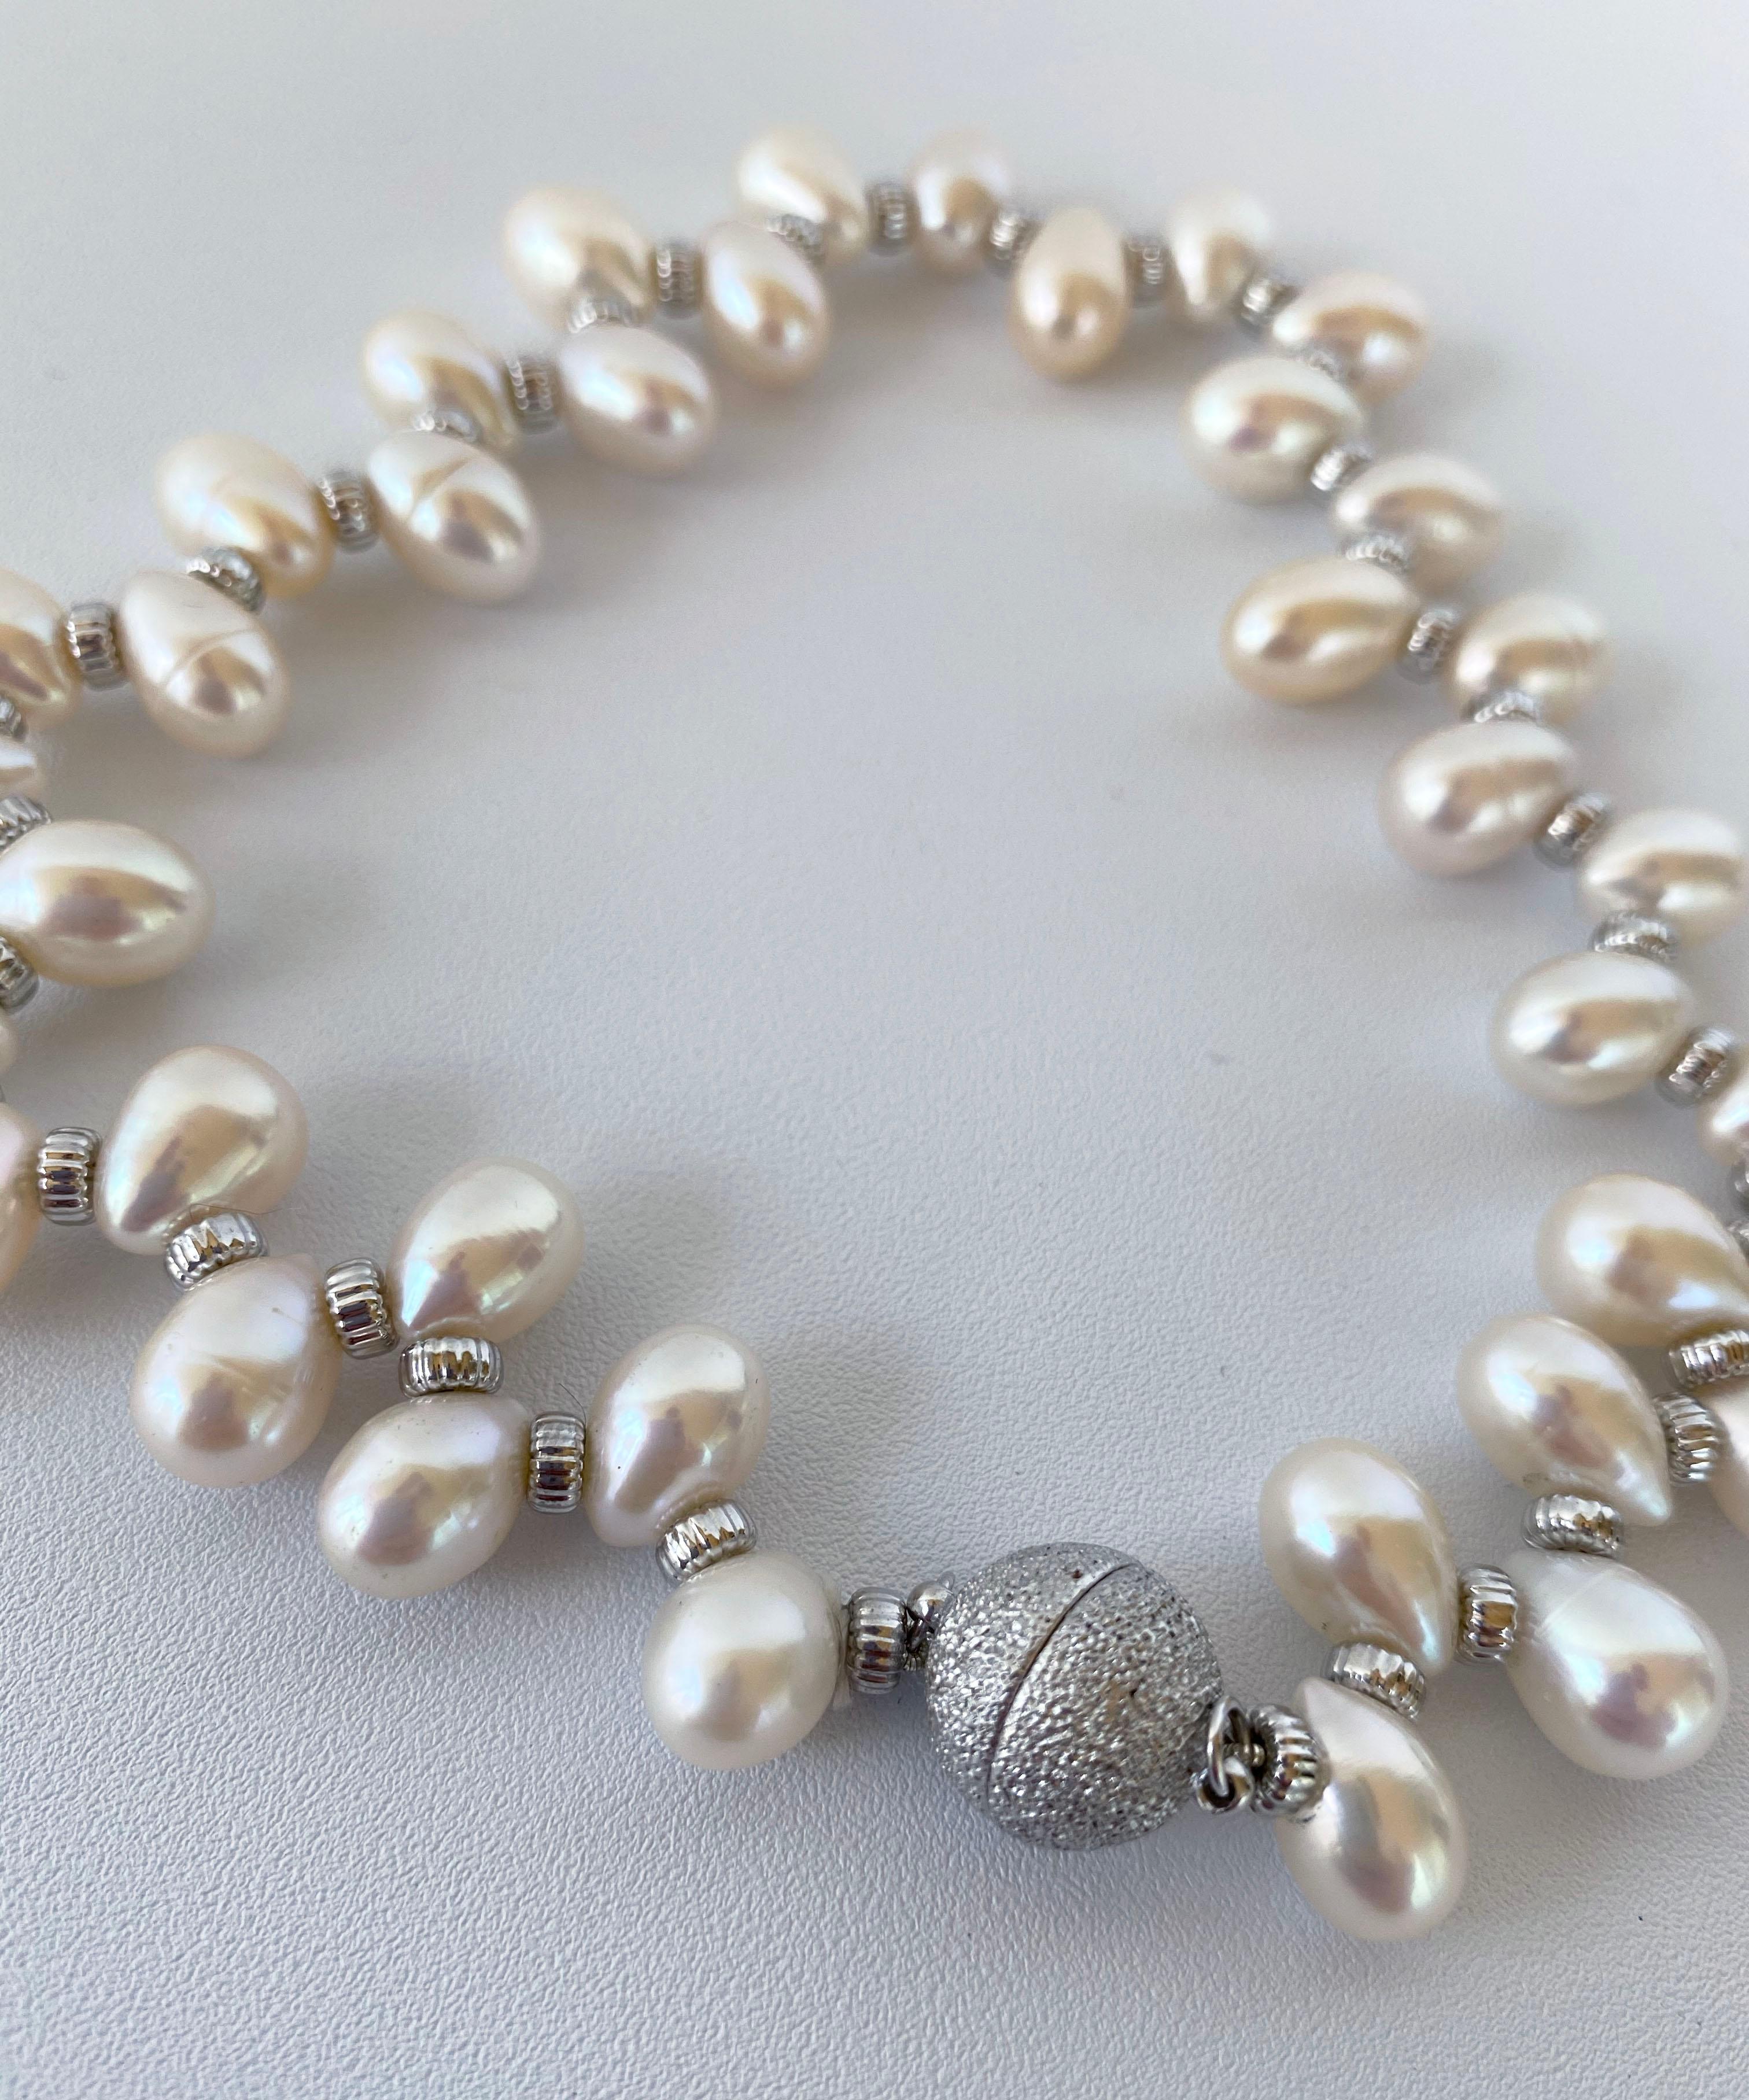 Artisan Marina J. White Teardrop Pearl Pet Necklace with Magnetic Clasp